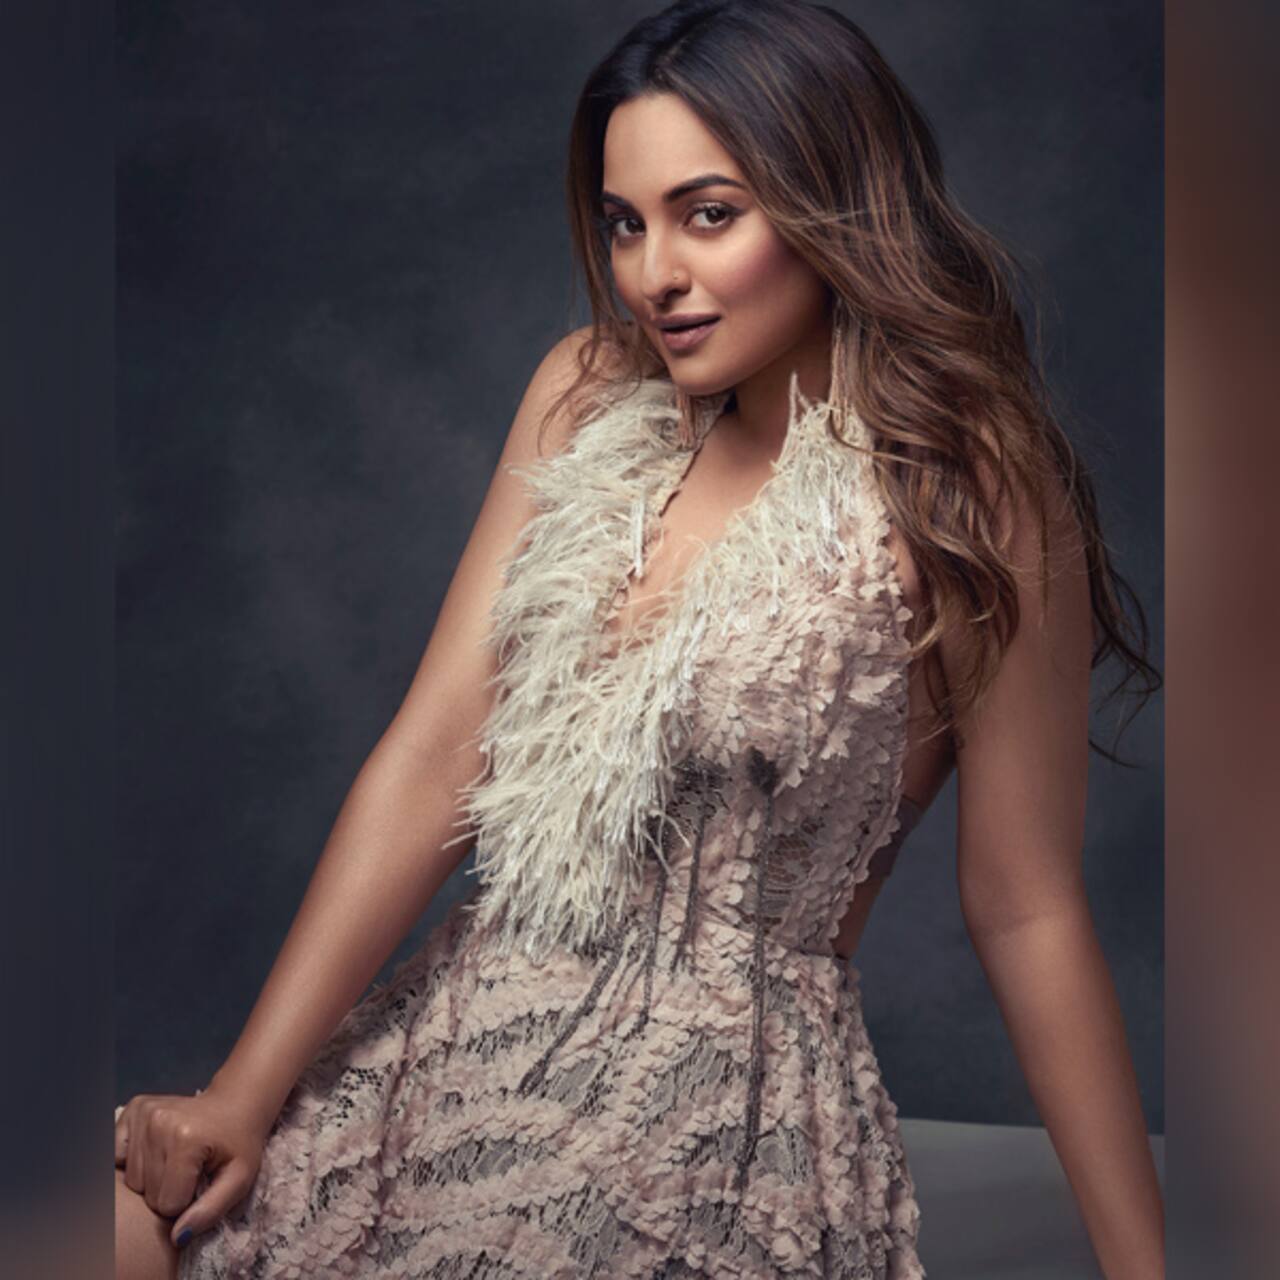 Sonakshi Sinha Is All About Fringes As She Graces The Cover Of Cosmopolitan 